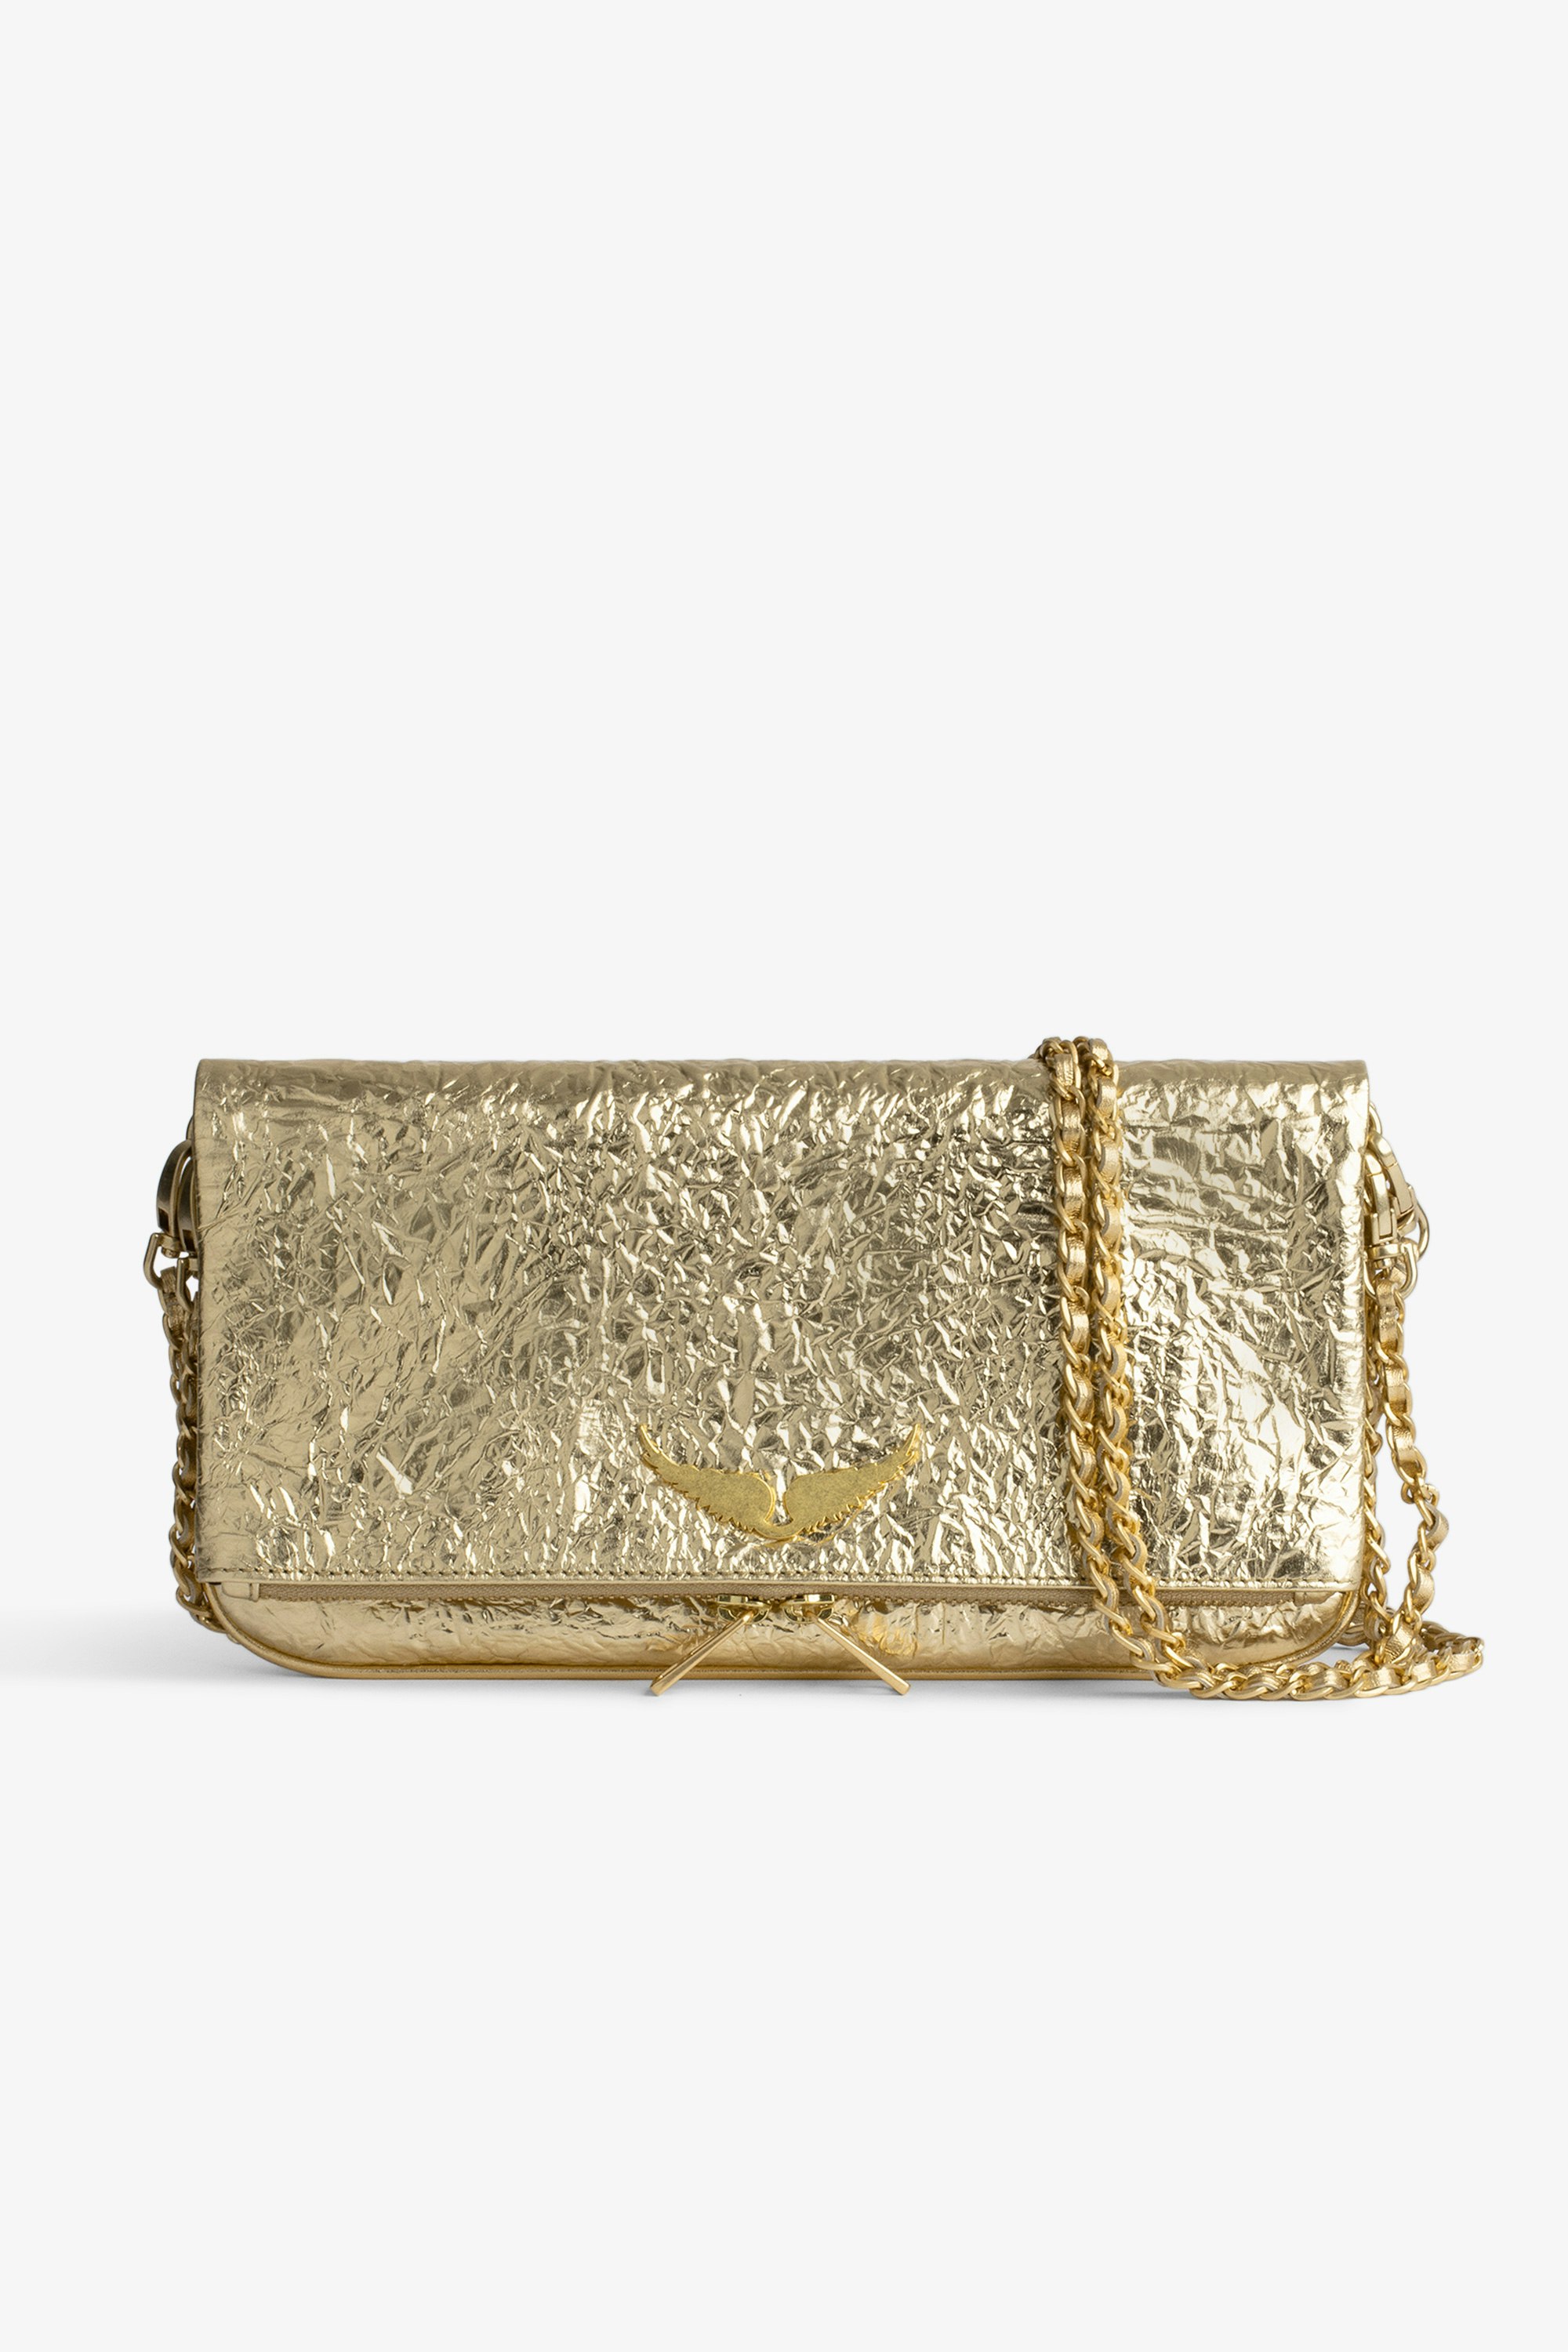 Rock クラッチバッグ Women’s Rock clutch in metallic gold crinkled leather with leather and chain shoulder strap